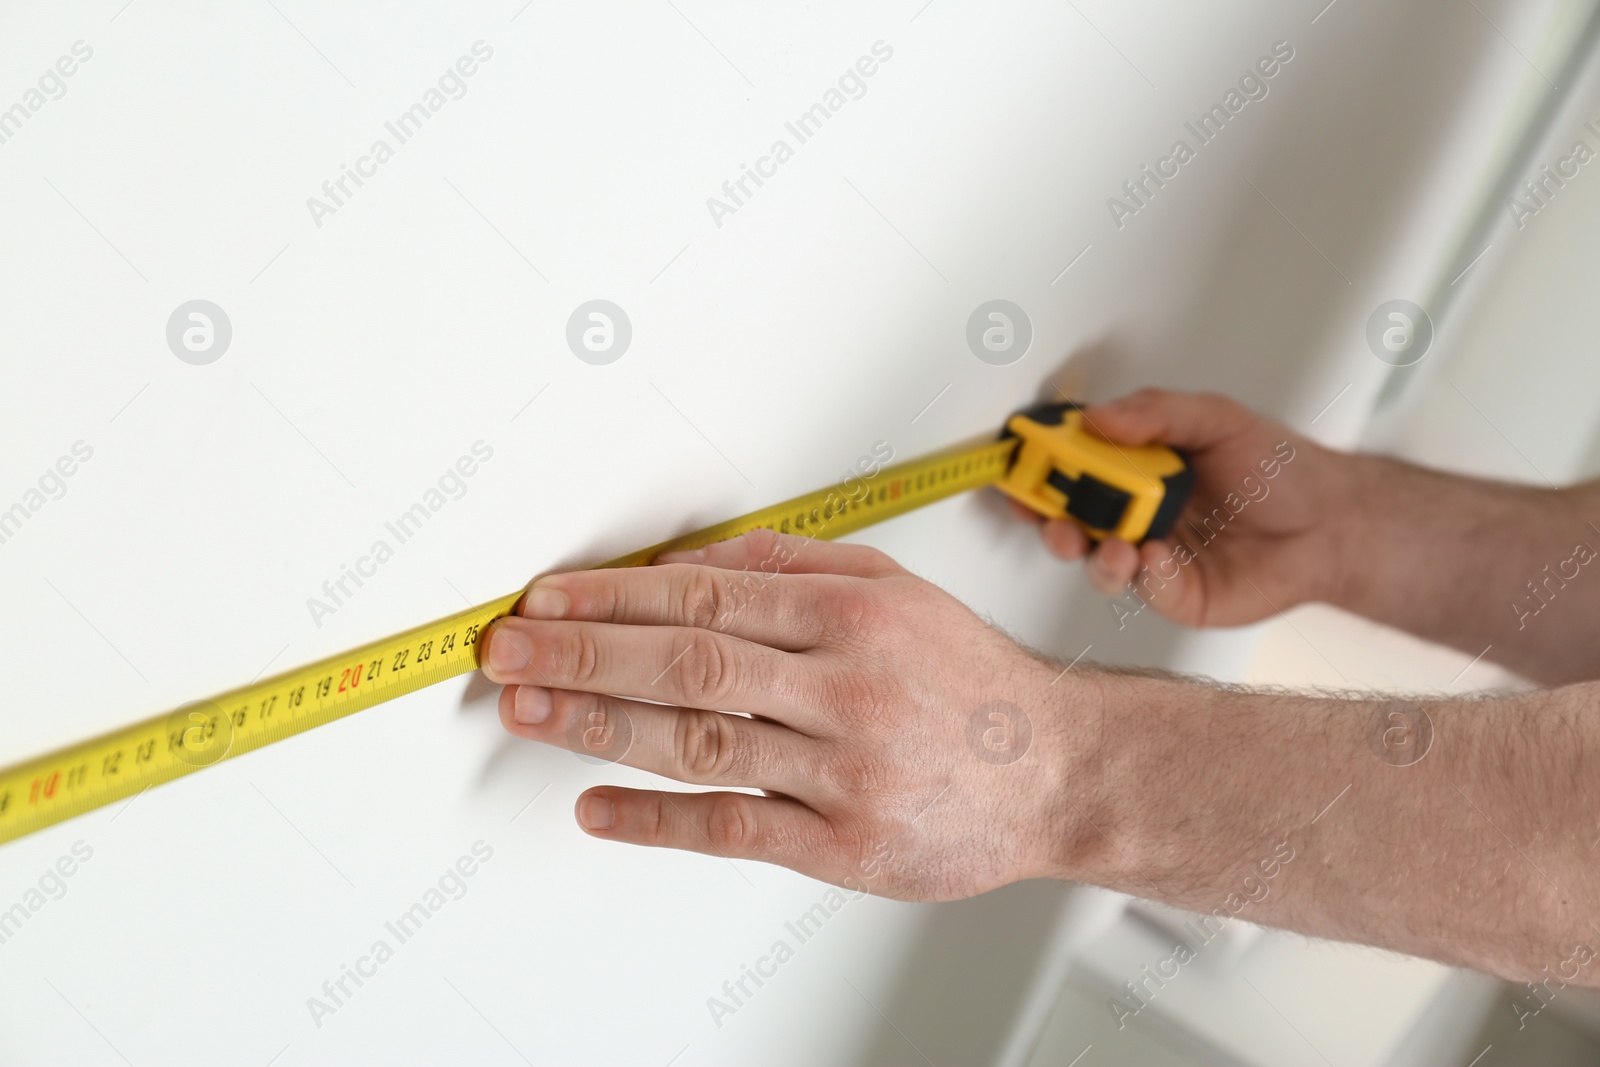 Photo of Man measuring white wall indoors, closeup. Construction tool